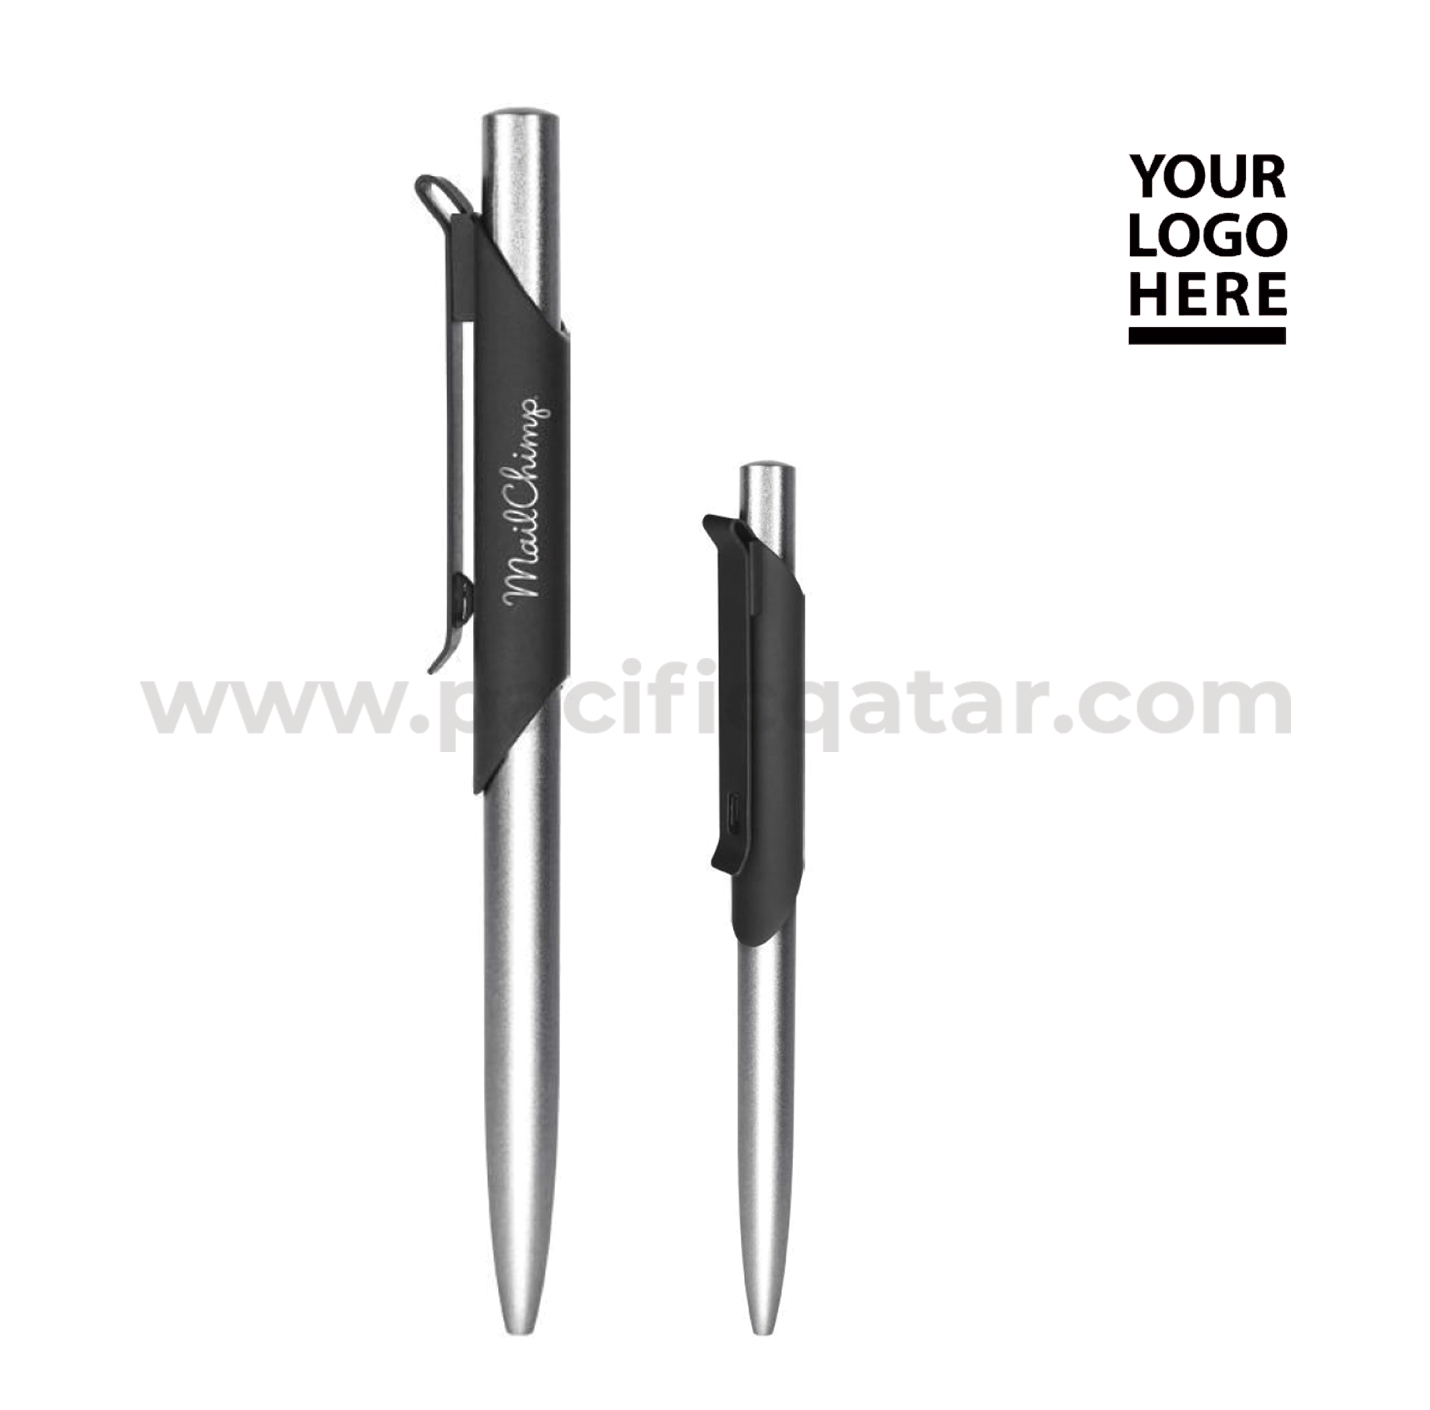 Silver and Black Metal Pens